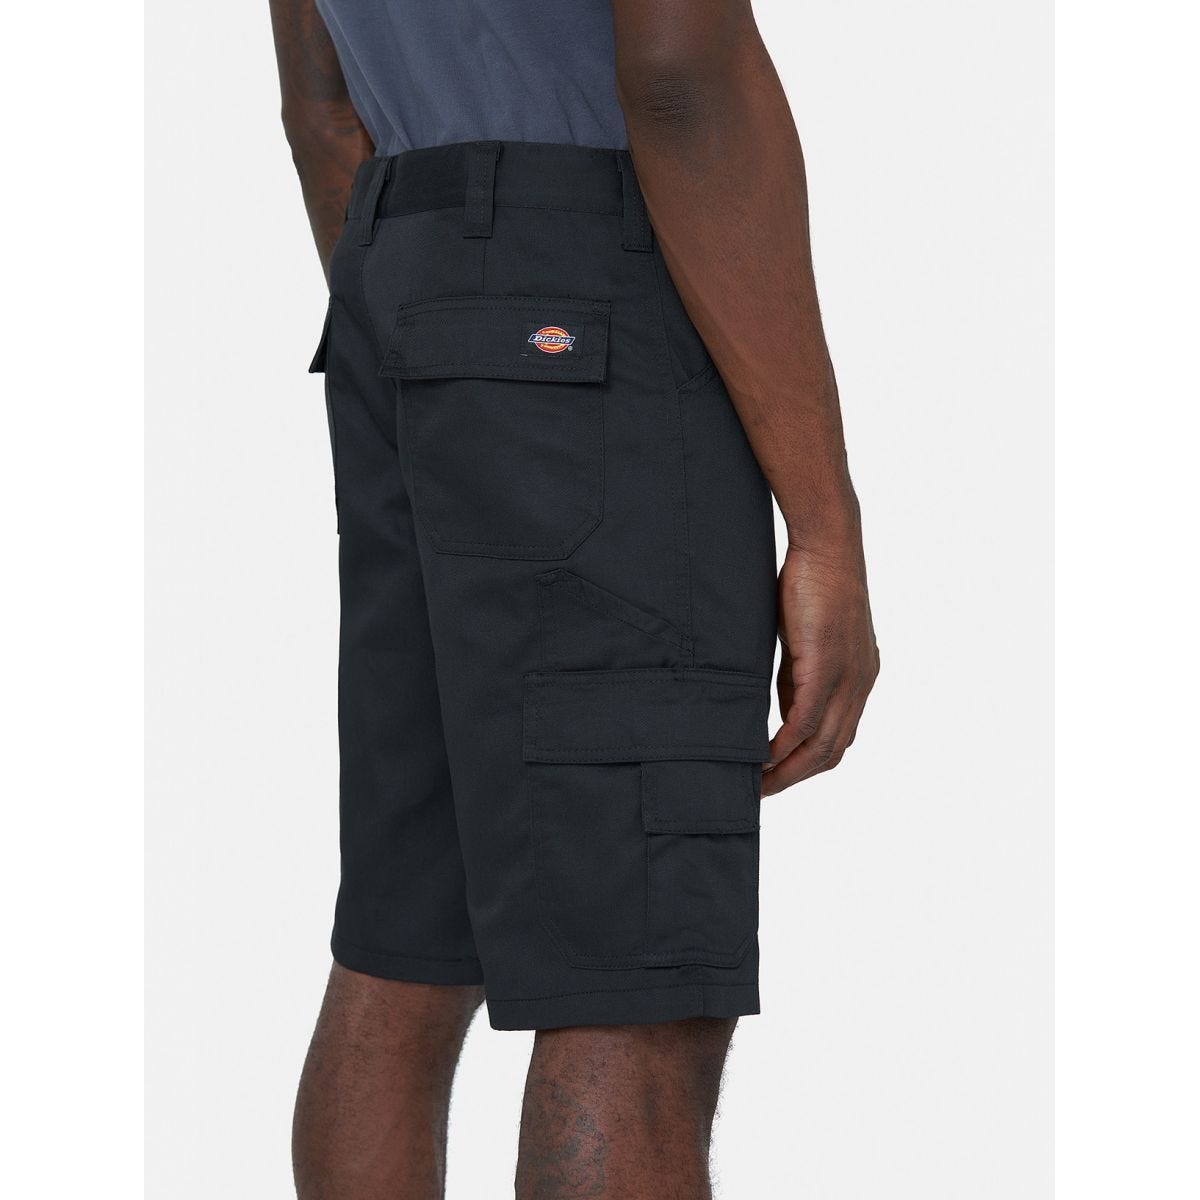 Short Everyday Noir - Dickies - Taille 42 3